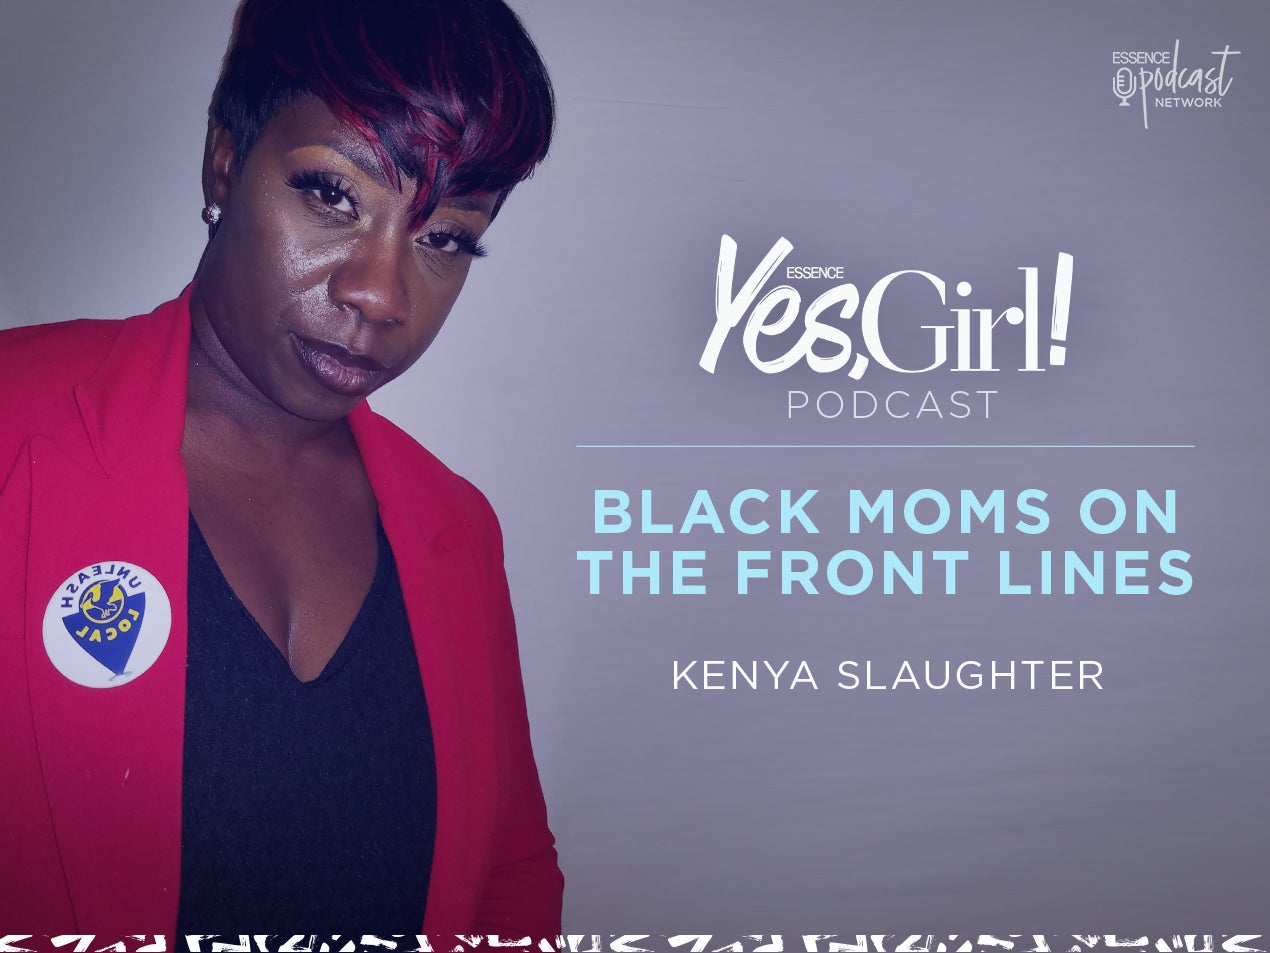 Black Moms On The Front Lines: Kenya Slaughter Steps Up For Retail Employees' Rights